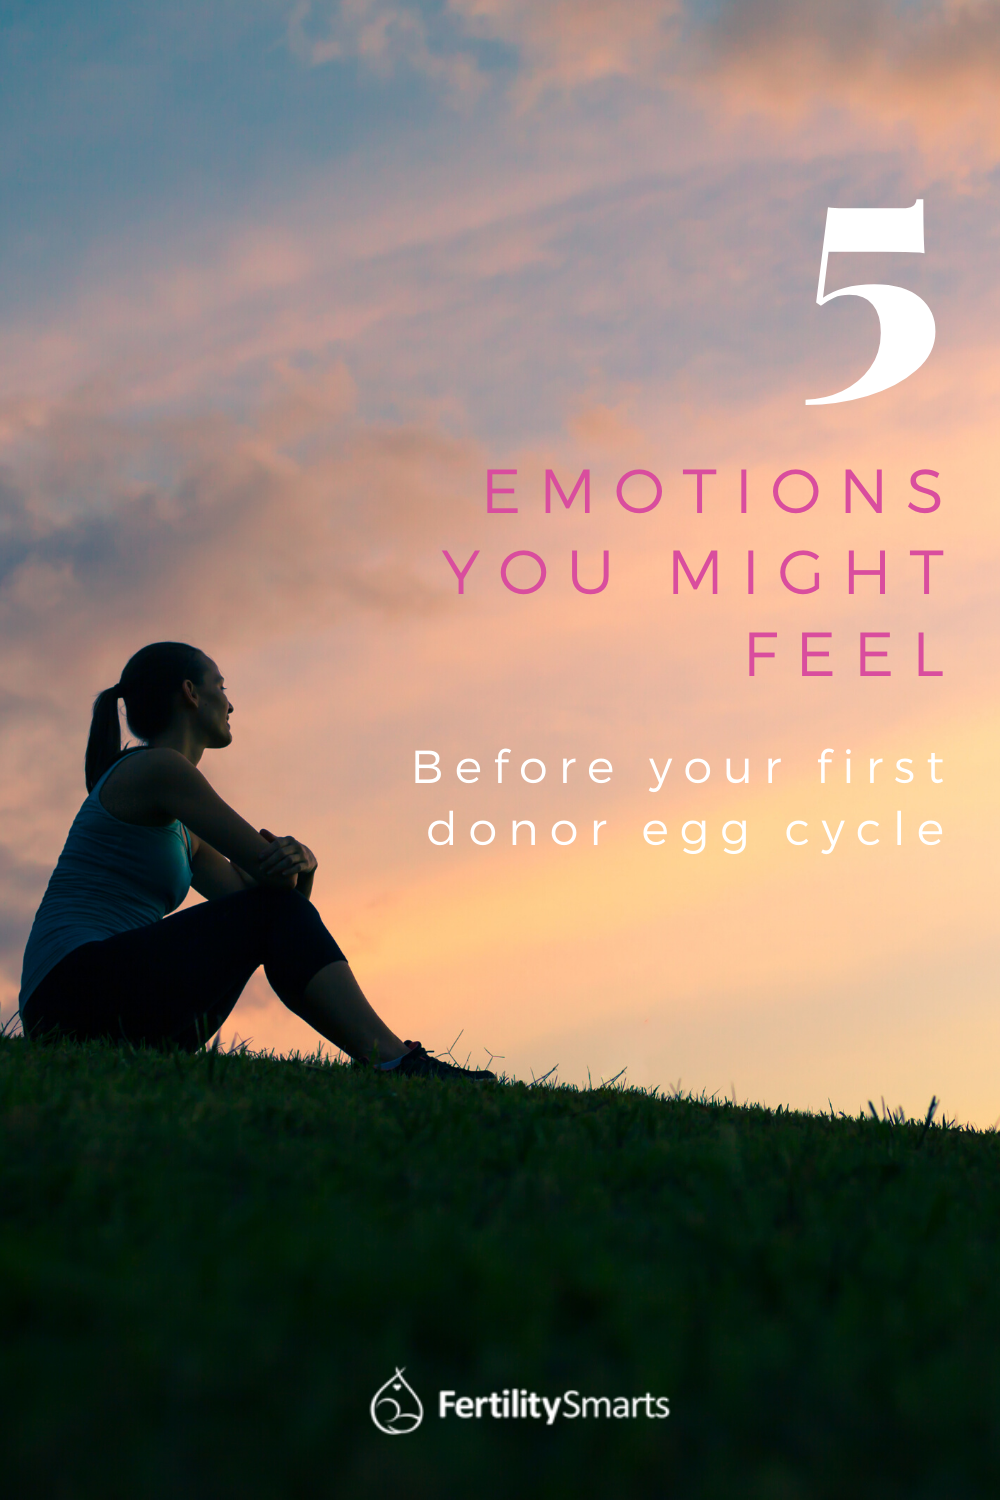 Pinterest Pin Title: 5 Emotions You Might Feel Before Your First Donor Egg Cycle